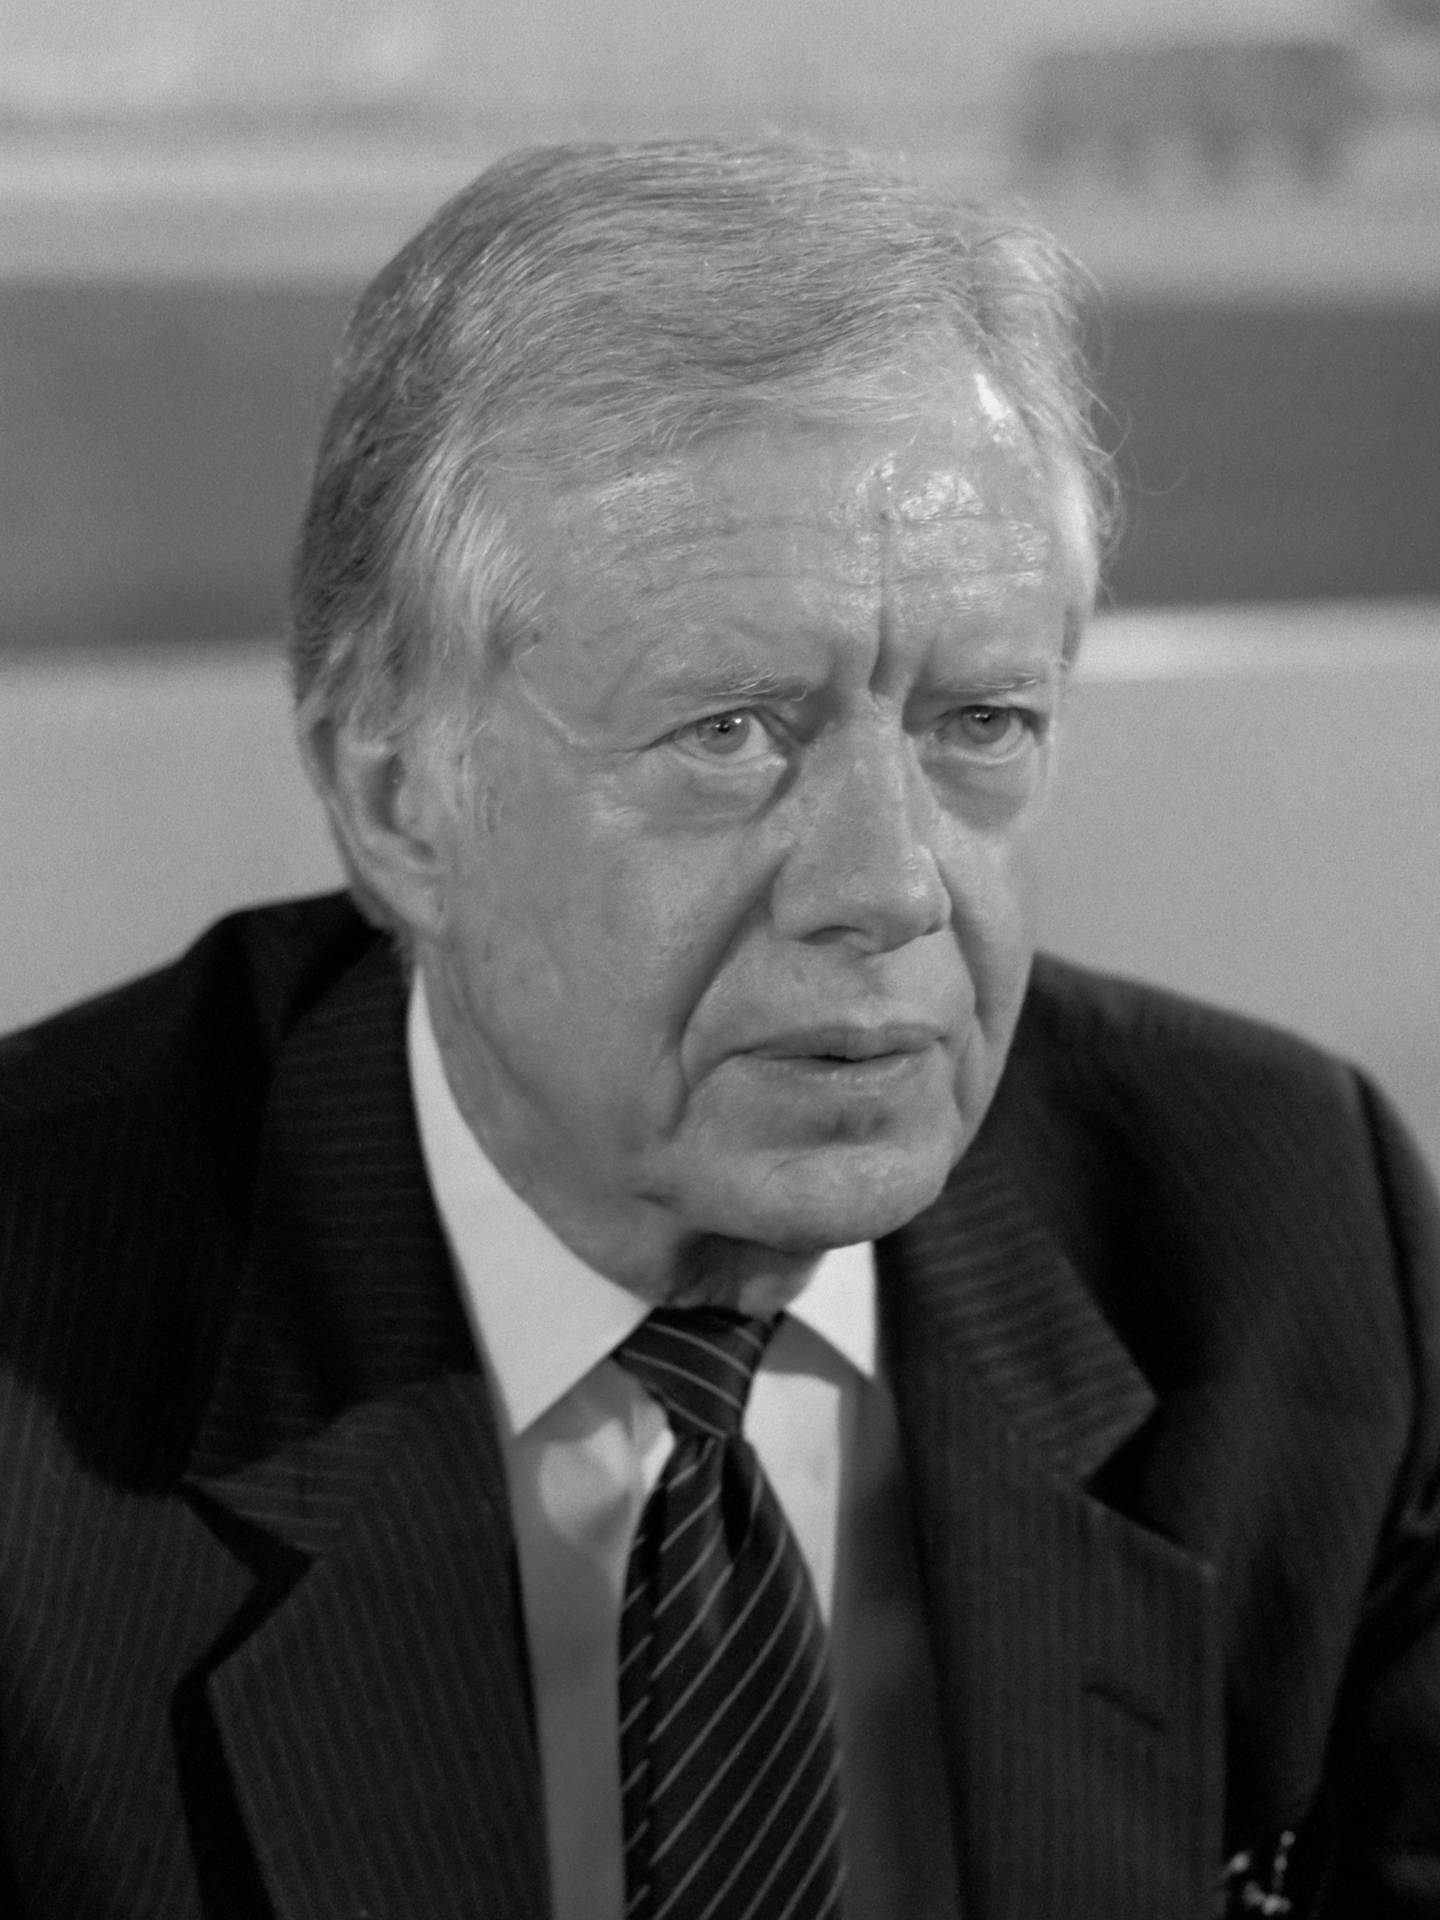 Jimmy Carter With Thick Hair Wallpaper